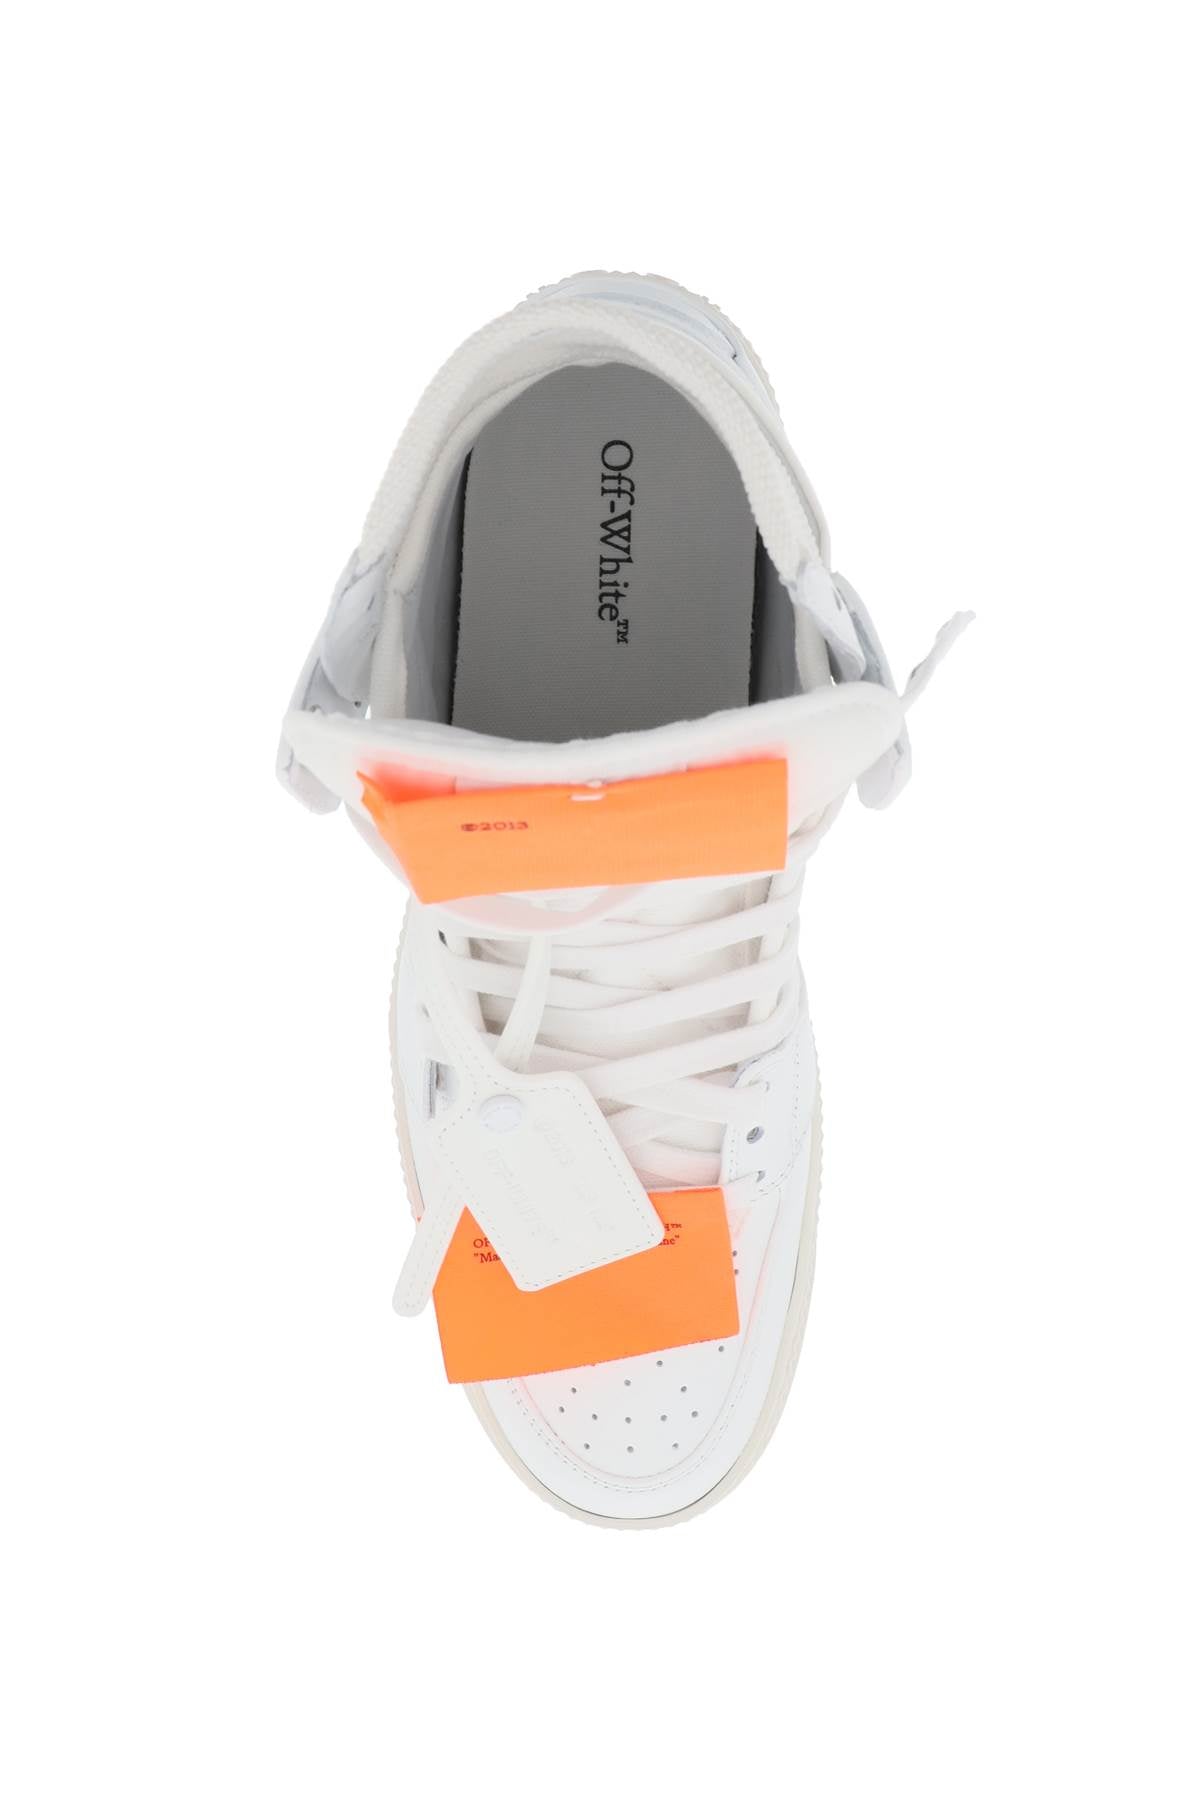 OFF-WHITE 3.0 Off-Court Women's Sneaker in Smooth Leather and Fabric Inserts